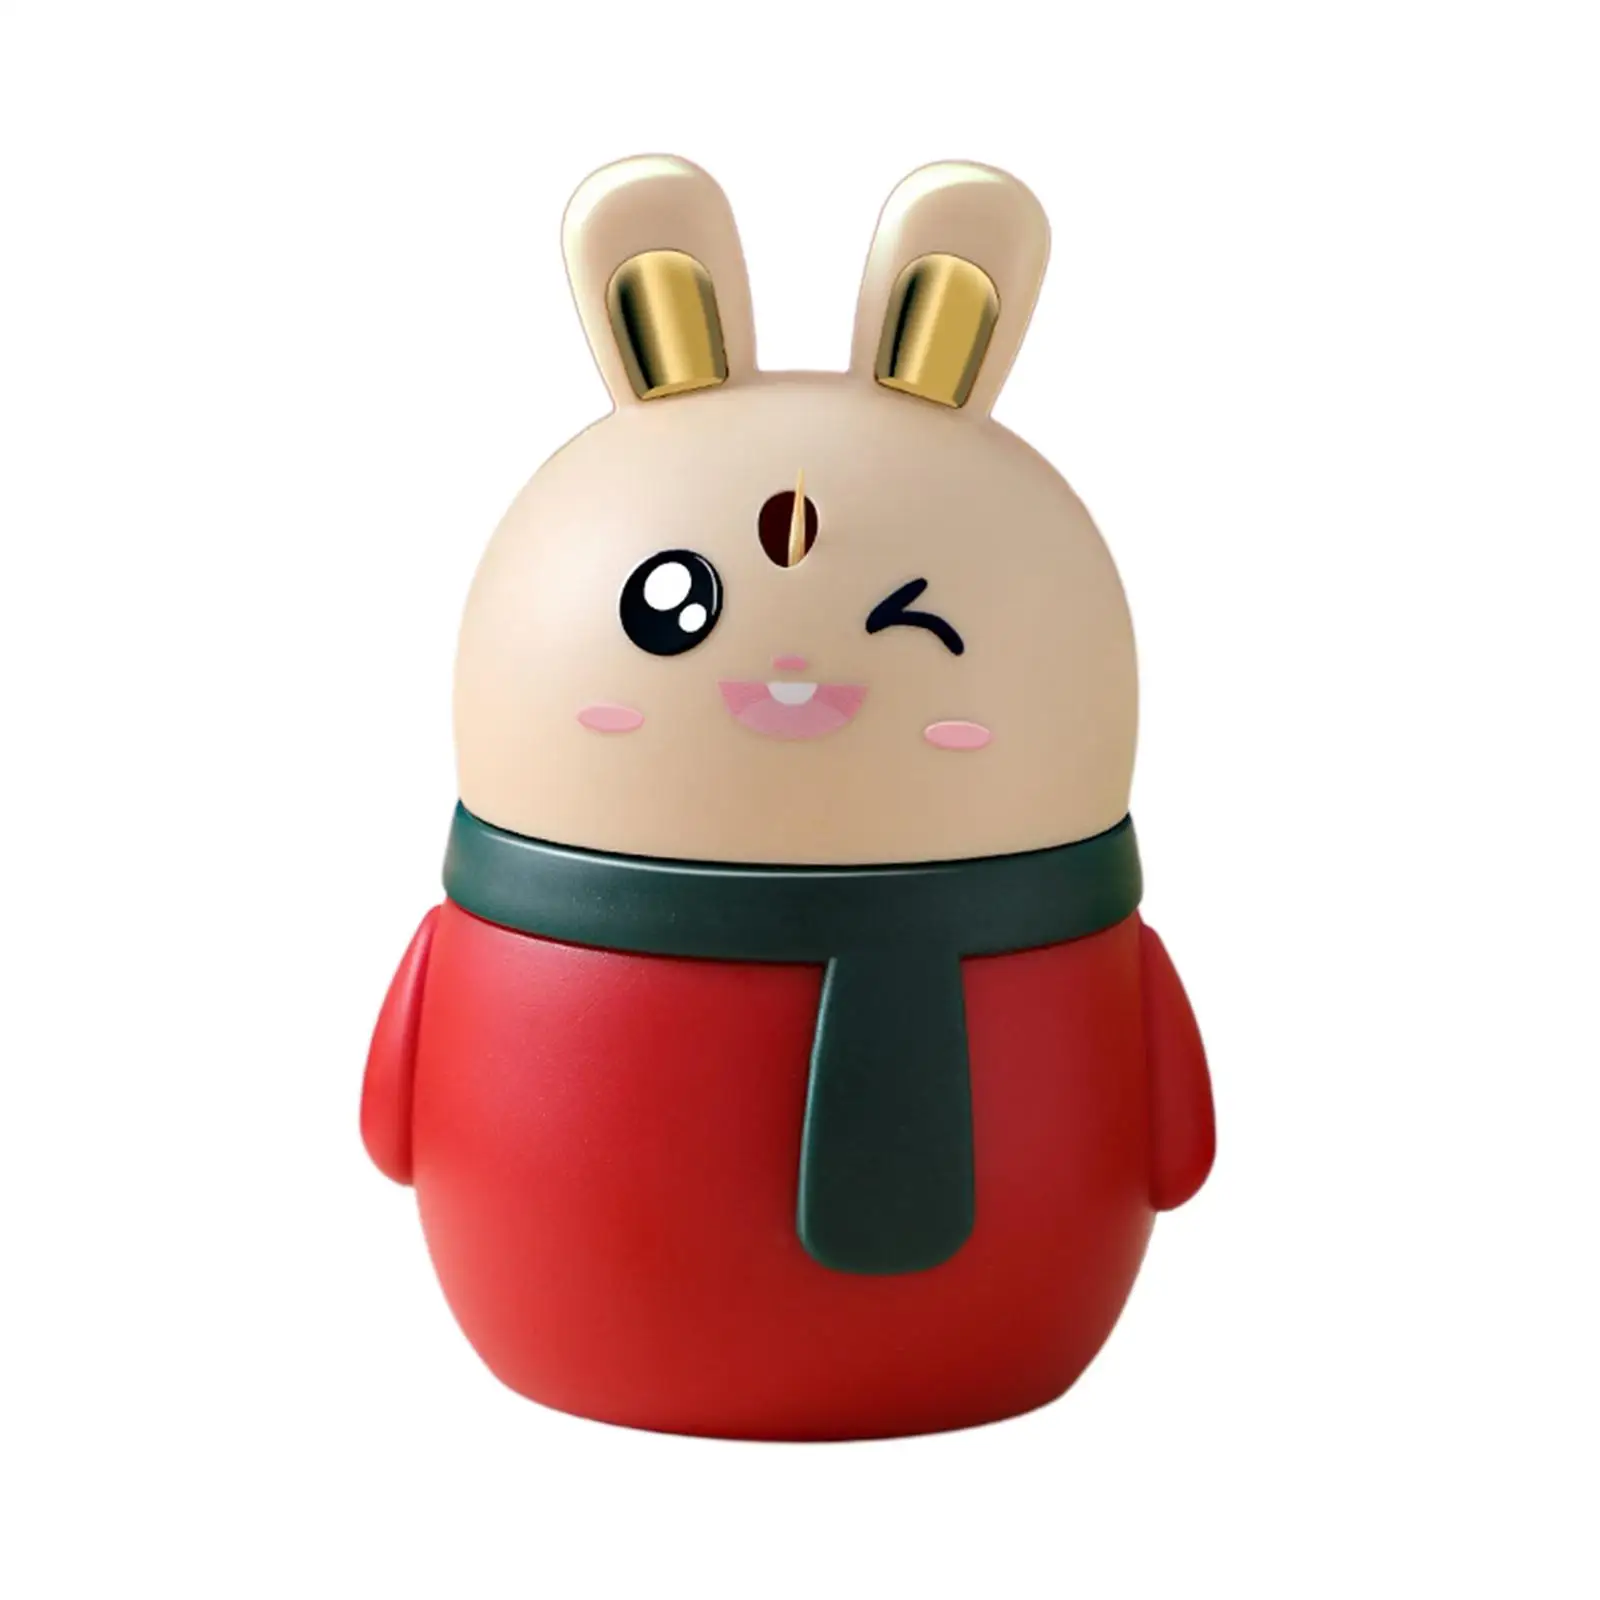 rabbit Toothpick Container Holder Pressing , Just Press The Back Side of Rabbit Head Toothpick Storage Box Durable